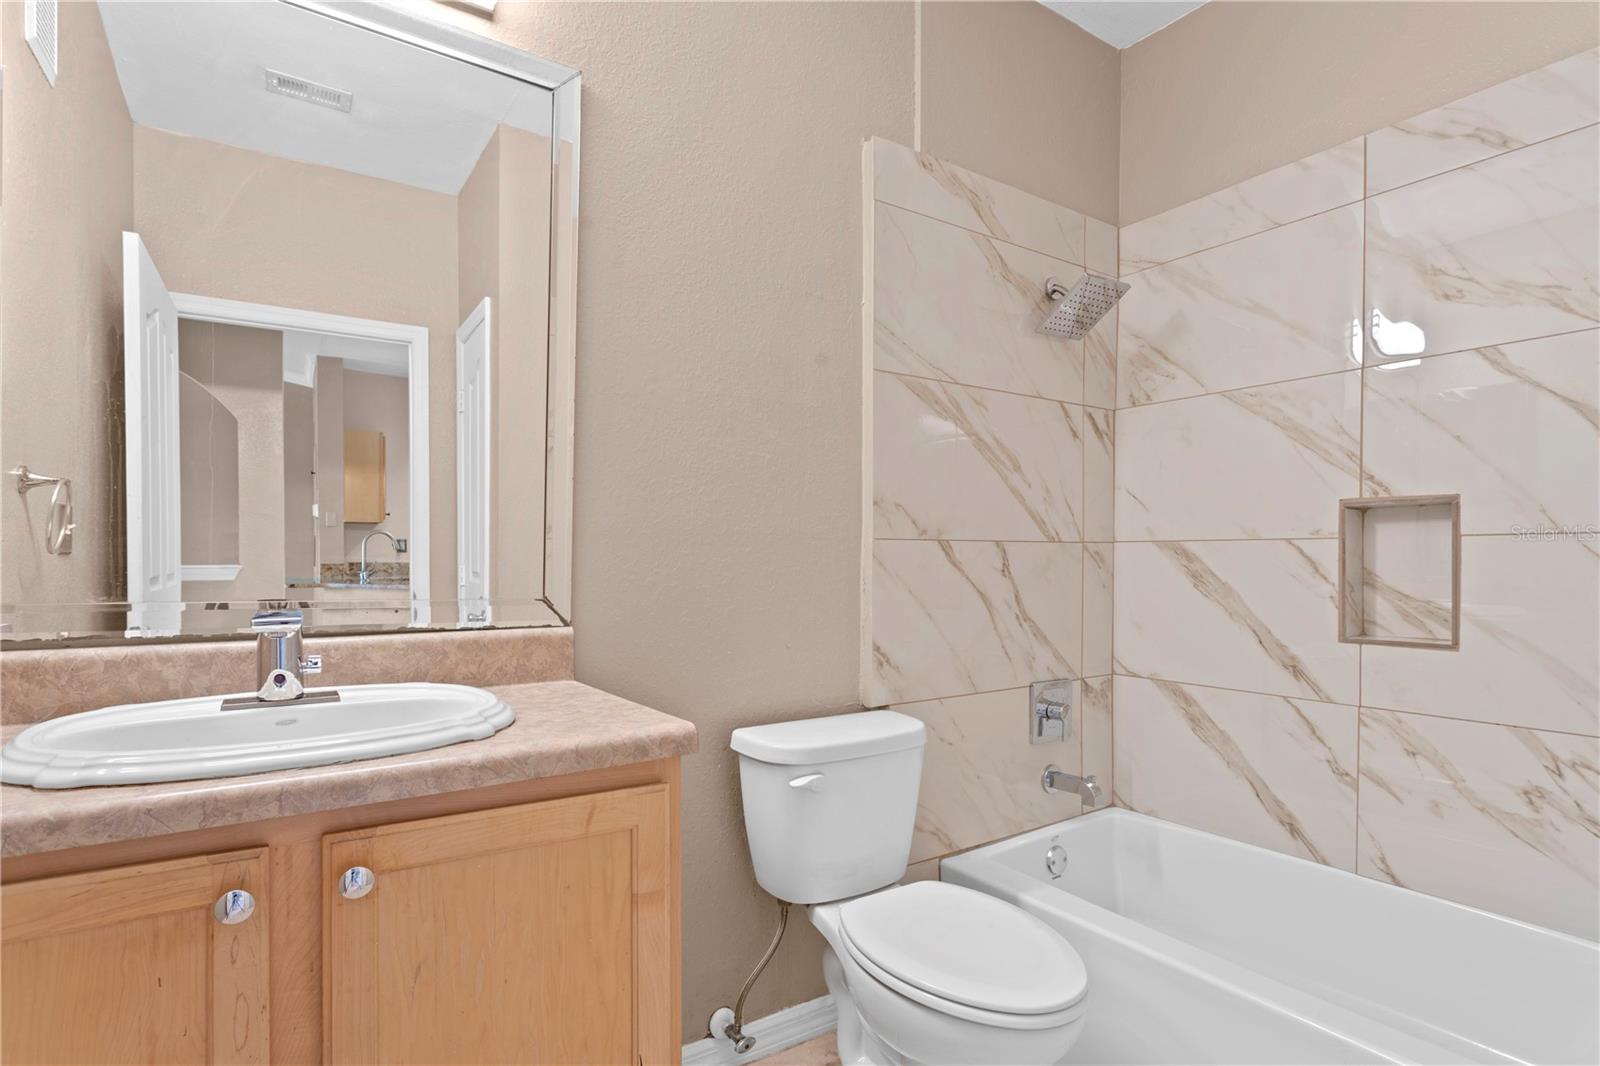 This spacious bathroom is complete with a newly tiled tub/shower and a coveted linen closet.